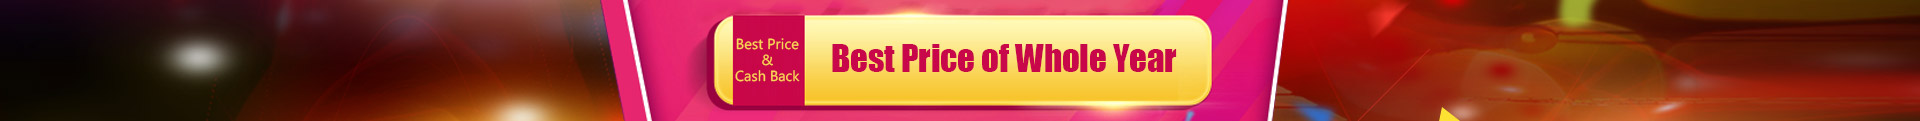 Best Price & Cash Back   Best Price of Whole Year